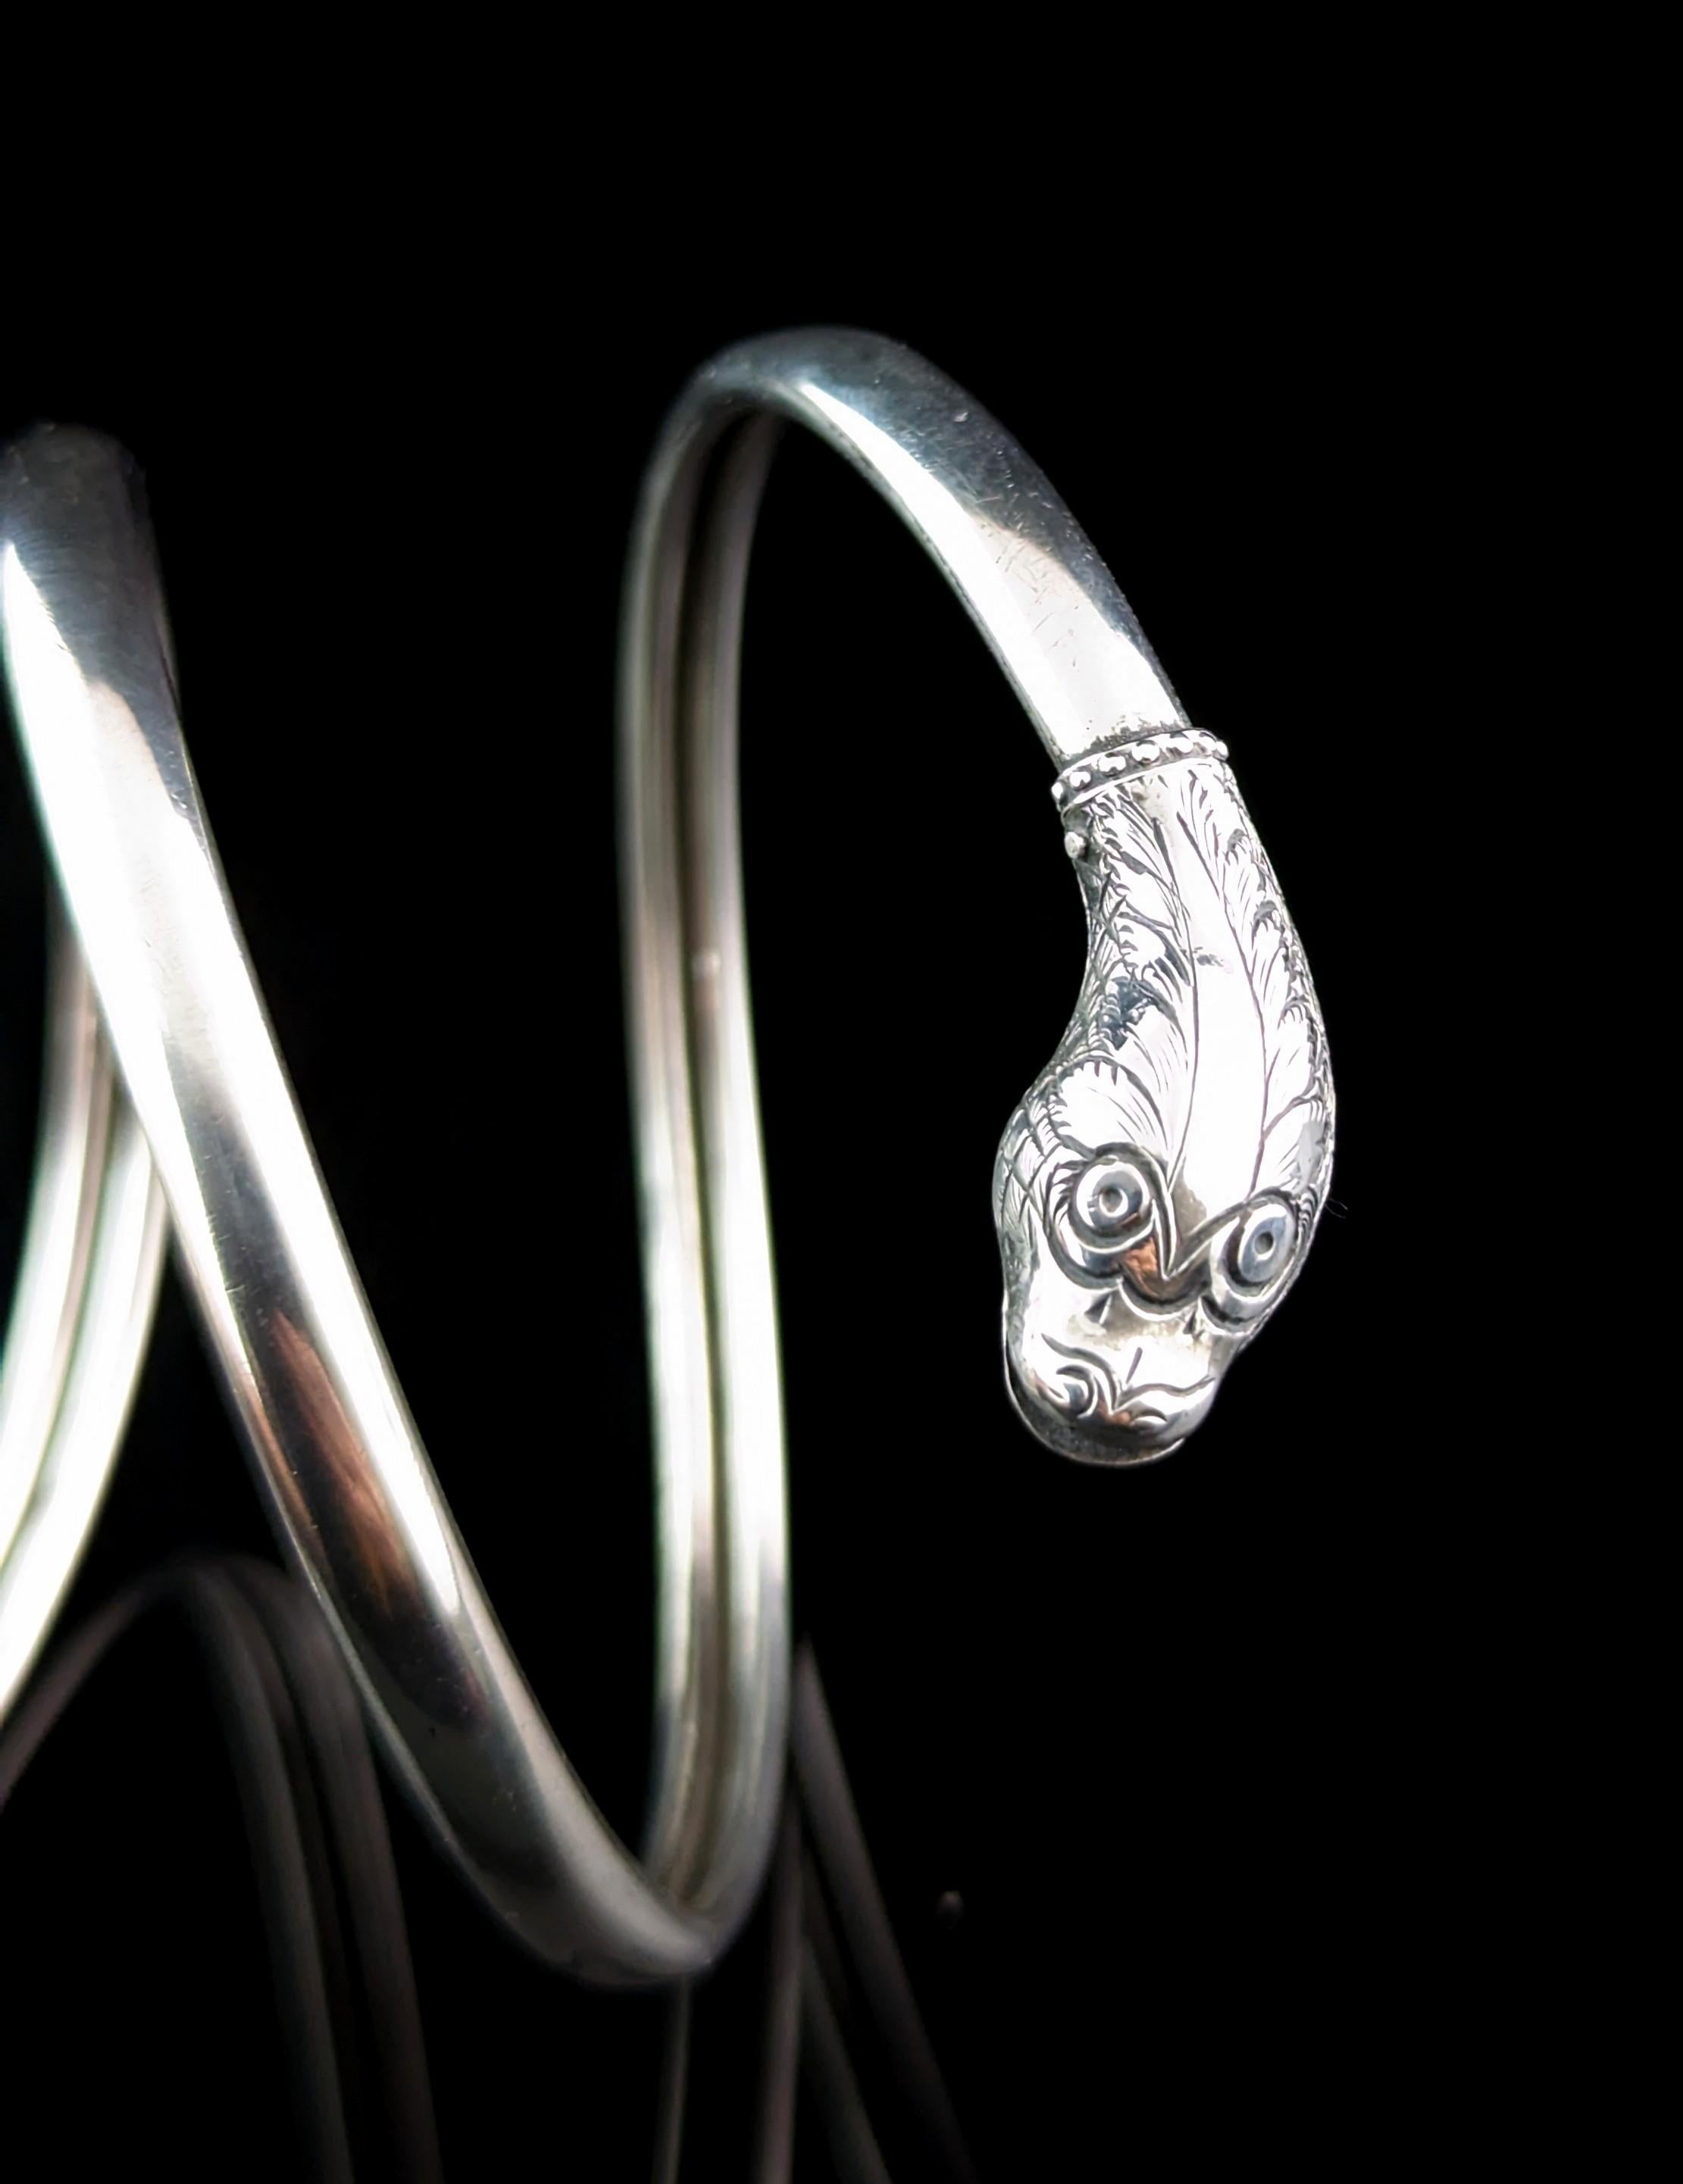 Whoever takes home this amazing antique sterling silver snake bangle will not be disappointed!

This spectacular piece is an arm bangle and made at the height of the Art Deco Egyptian revival period and this is one period that saw arm bangles rise